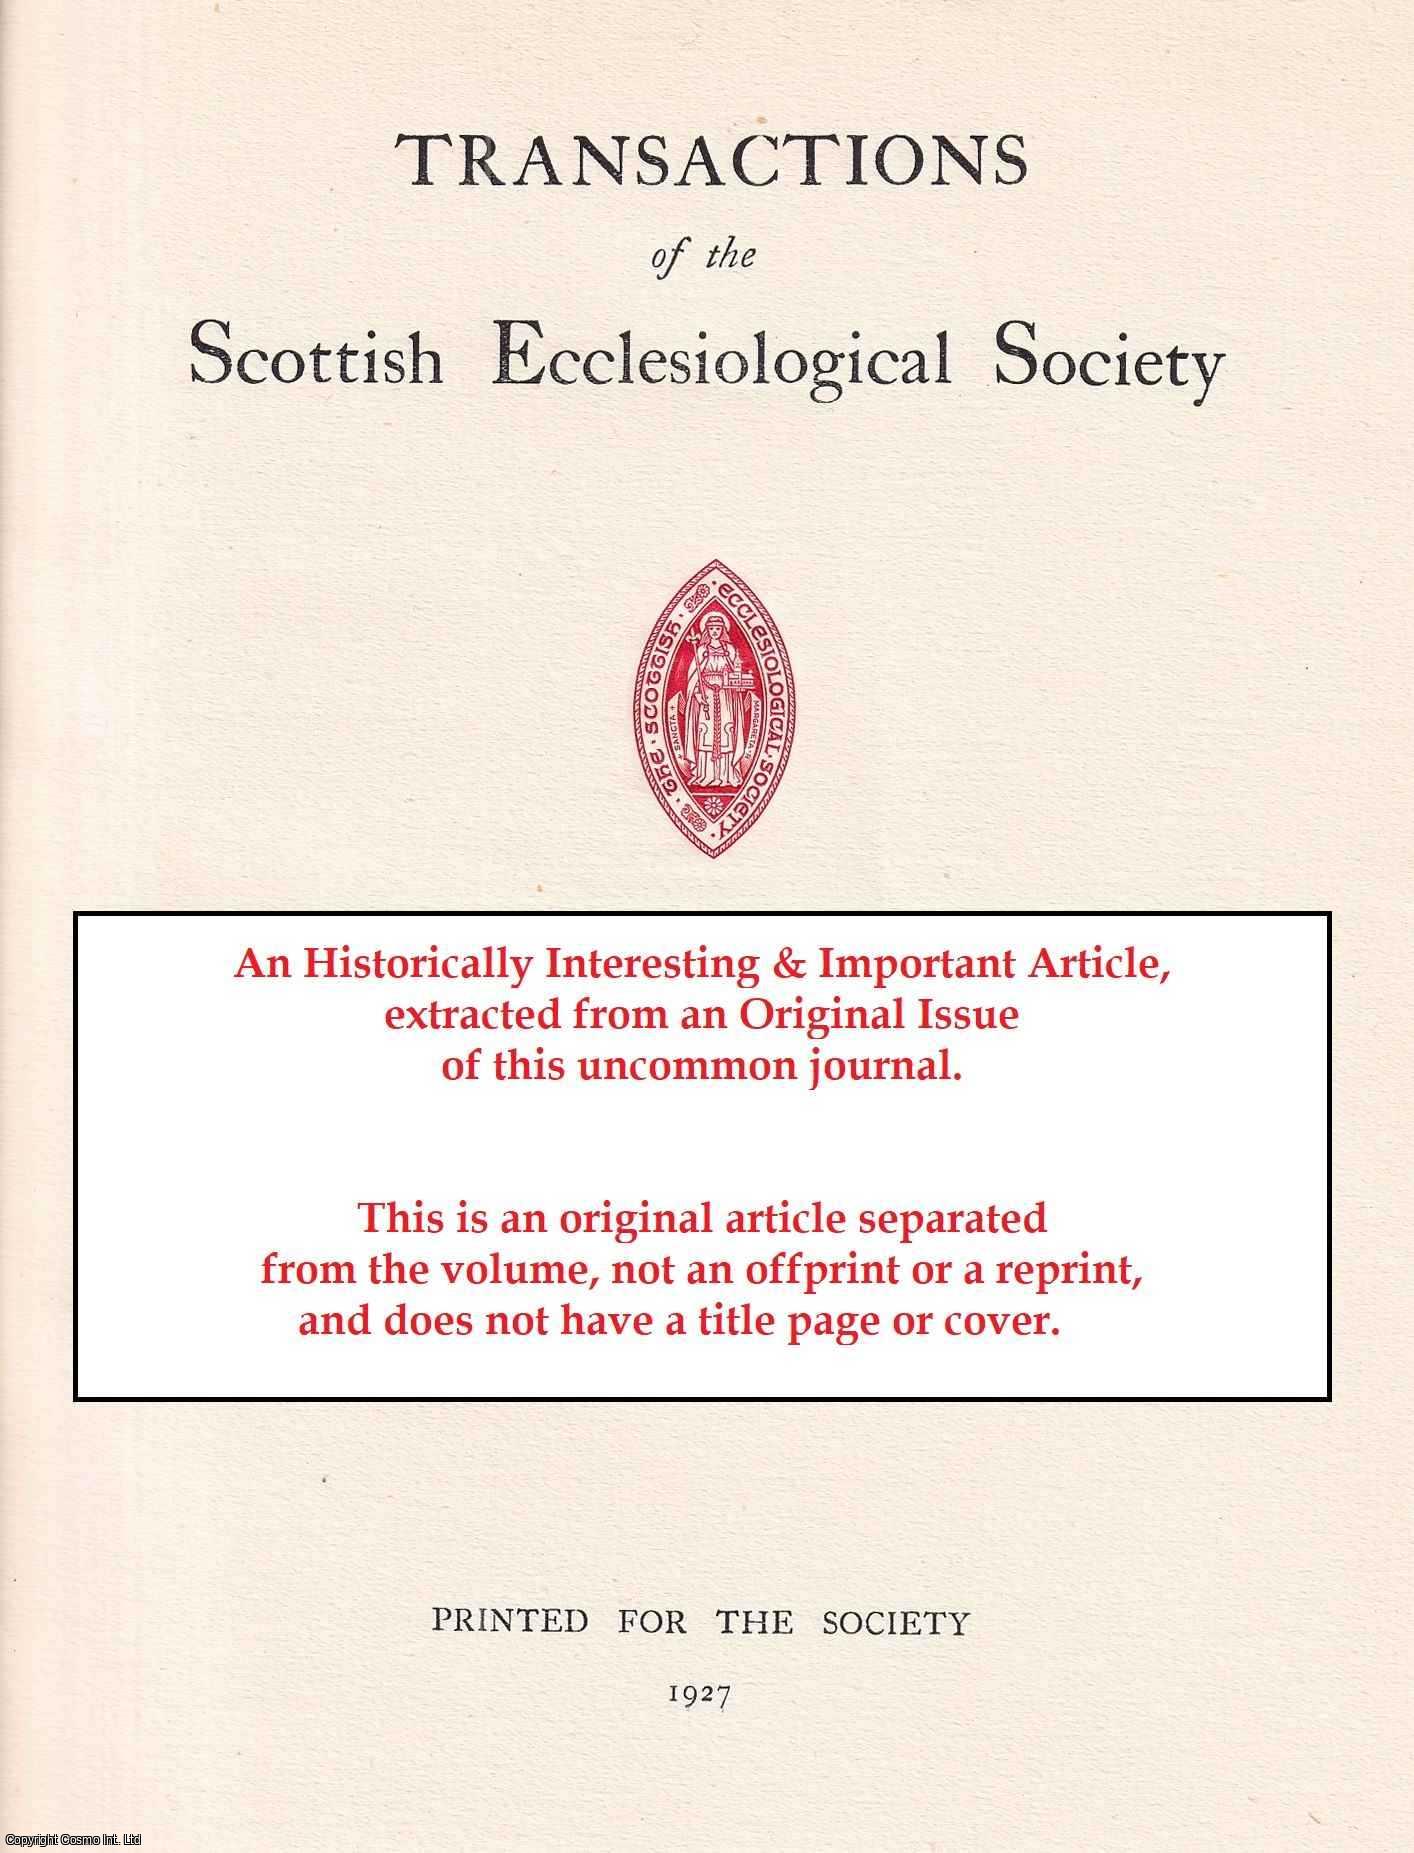 Various - Linlithgow, Abercorn and Dalmeny Churches. An original article from the Transactions of the Scottish Ecclesiological Society, 1904.